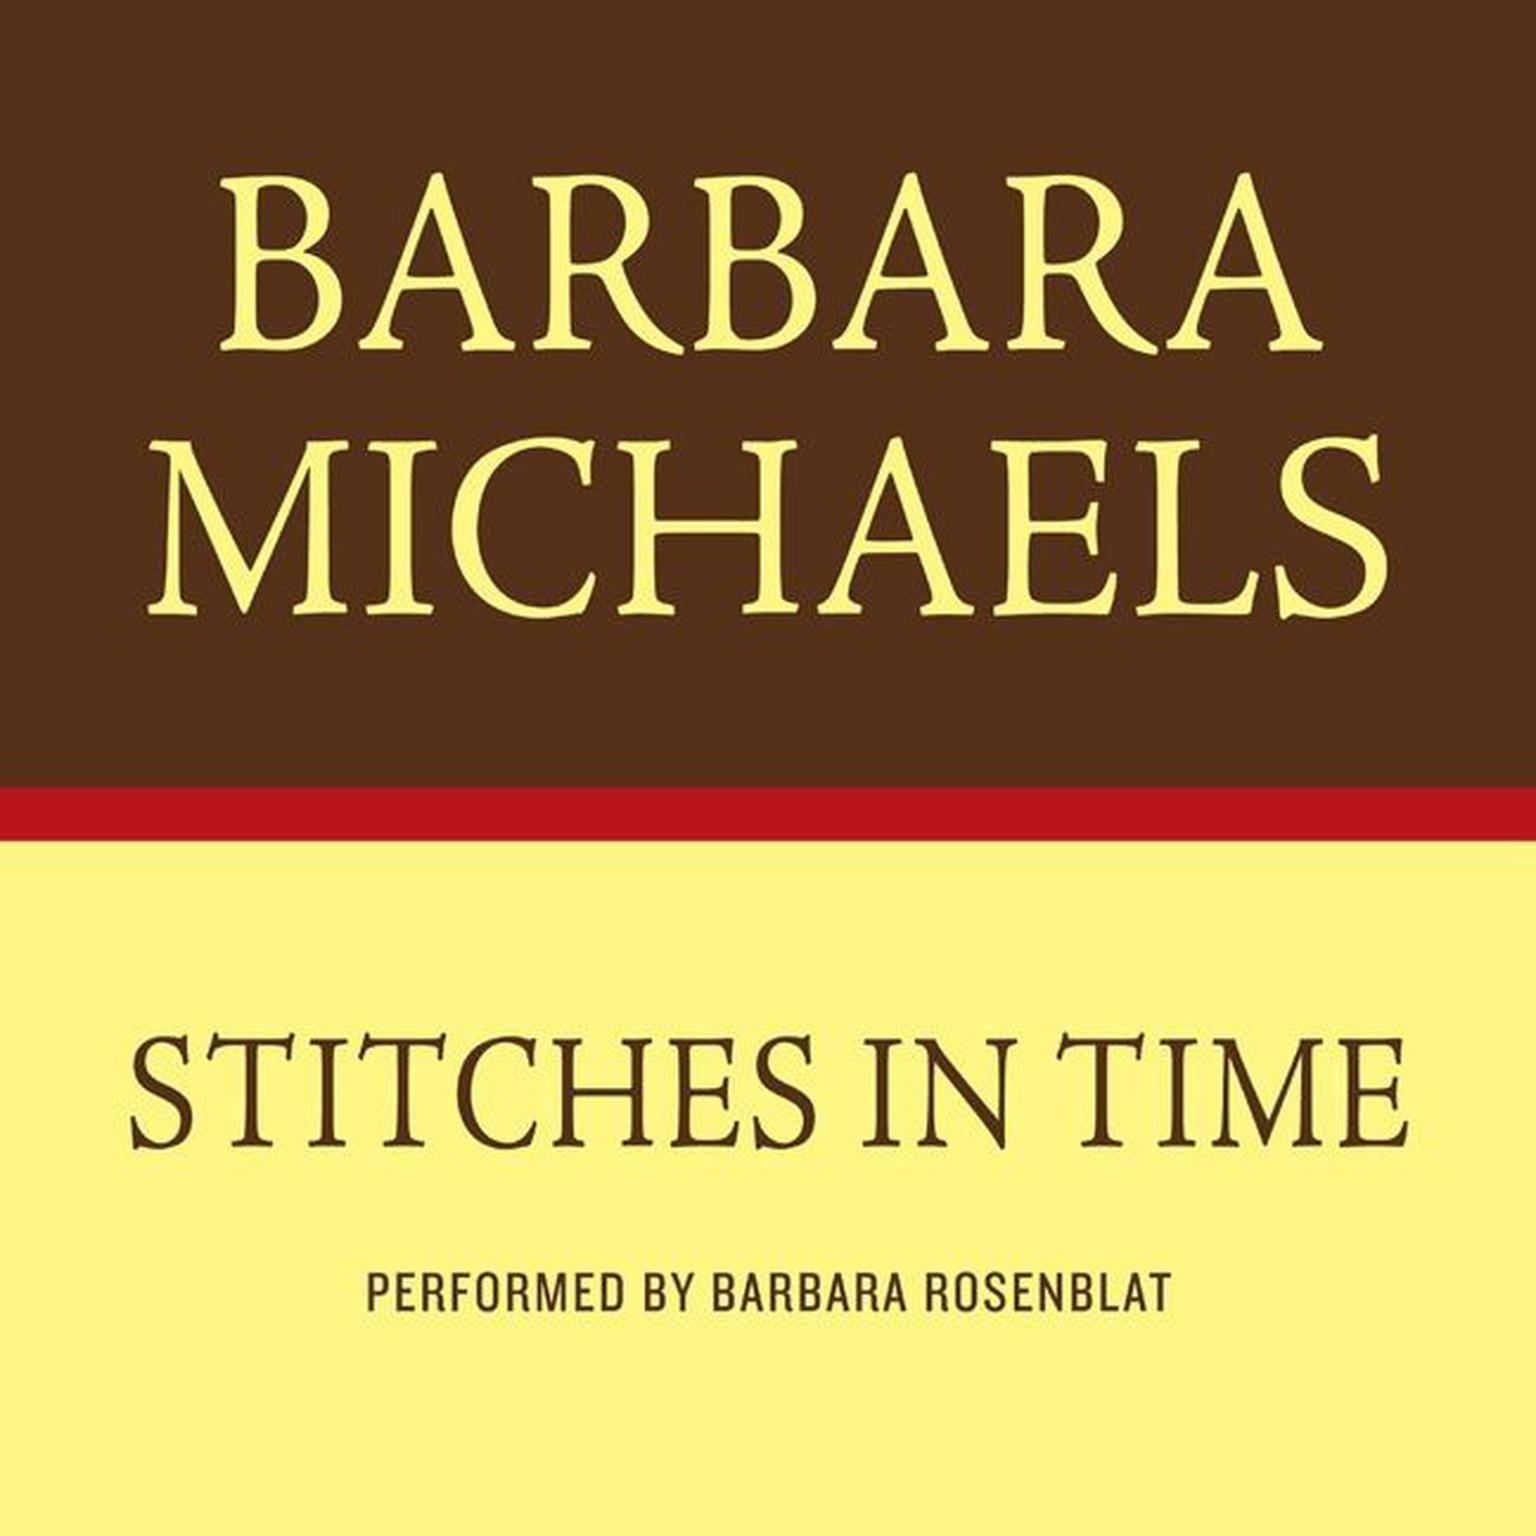 STITCHES IN TIME (Abridged) Audiobook, by Barbara Michaels